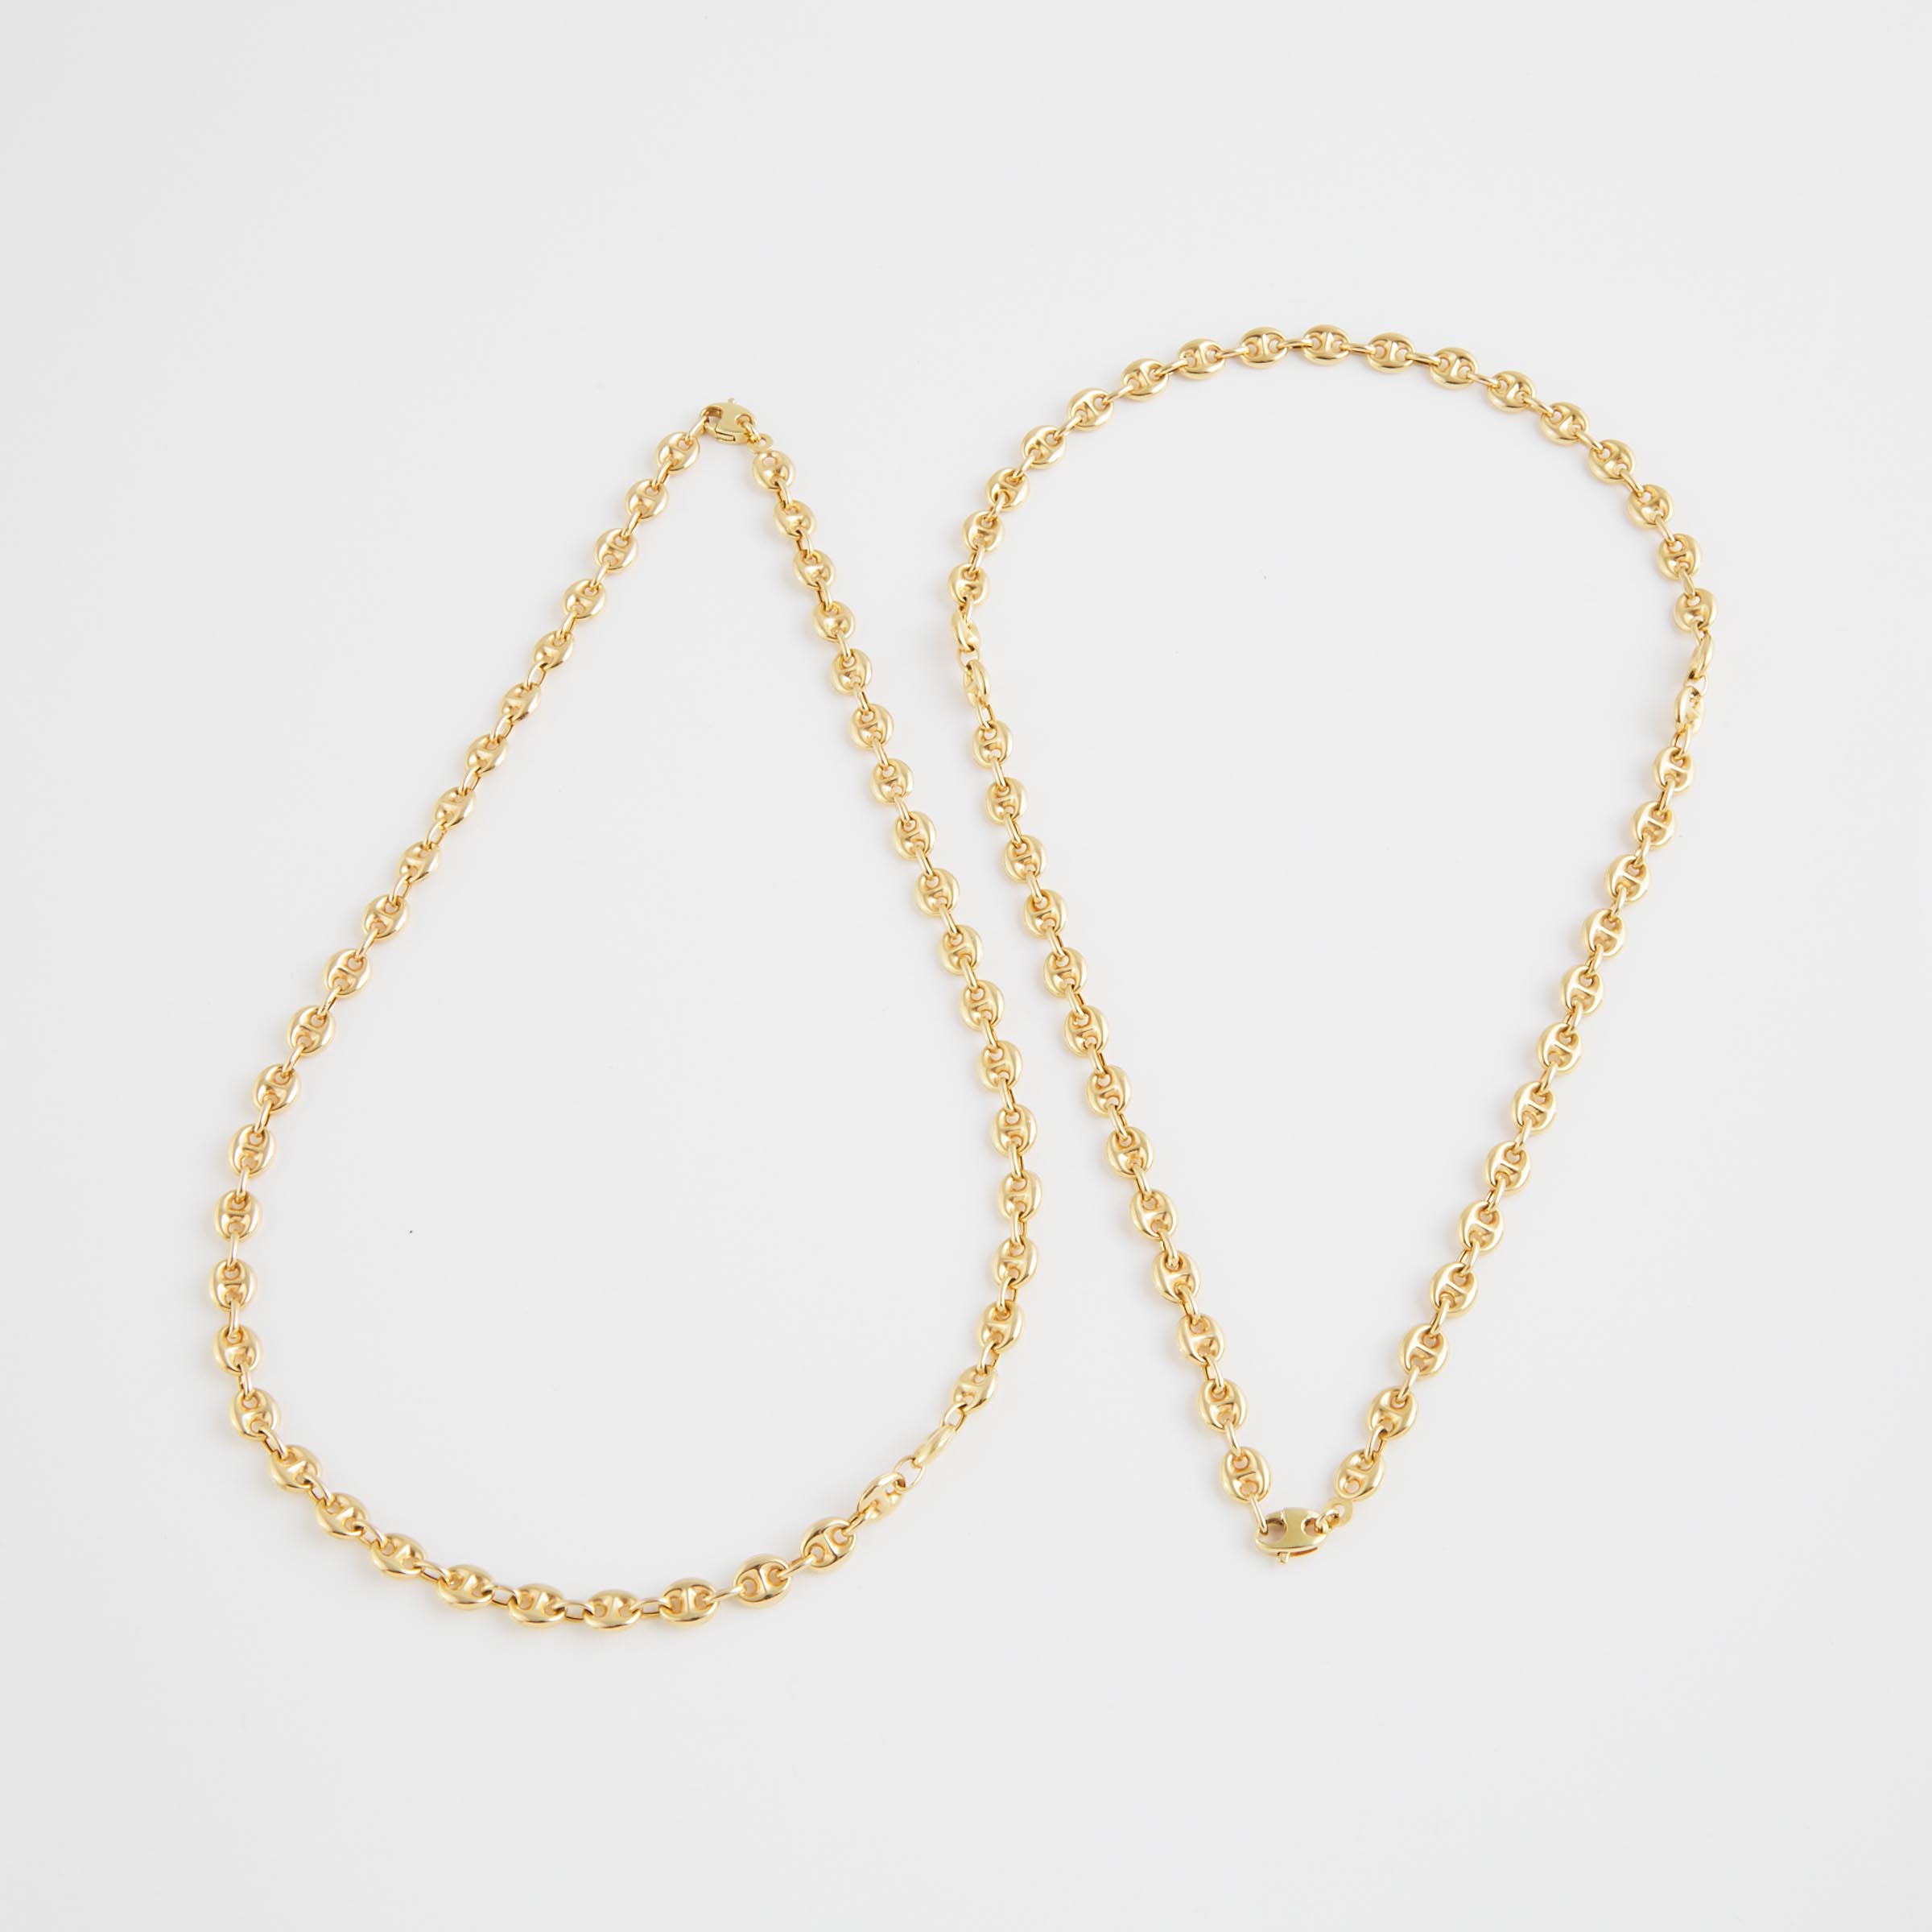 2 x Italian 14k Yellow Gold Naval Link Chains